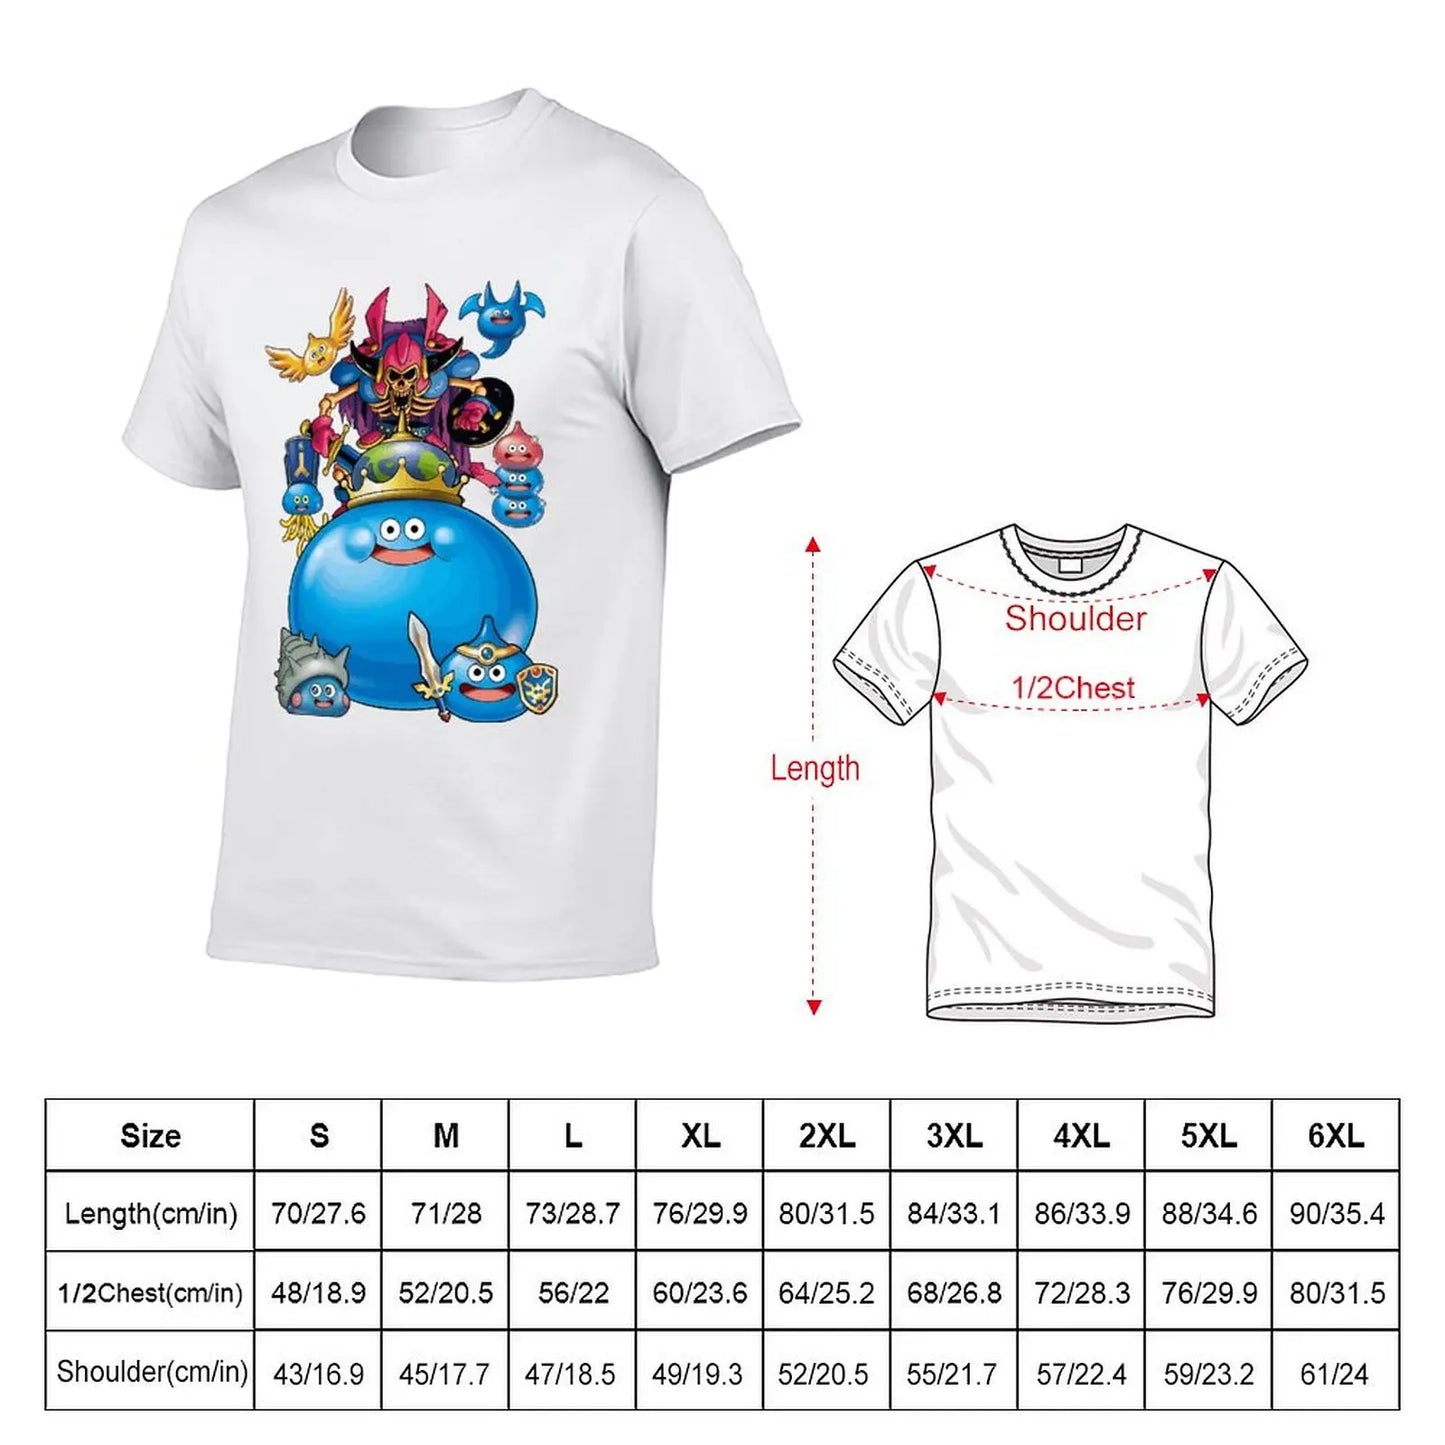 Dragon Warrior Slimes Party Dragon Quest Fresh T-shirt Campaign Top Tee Premium Humor Graphic Fitness Eur Size